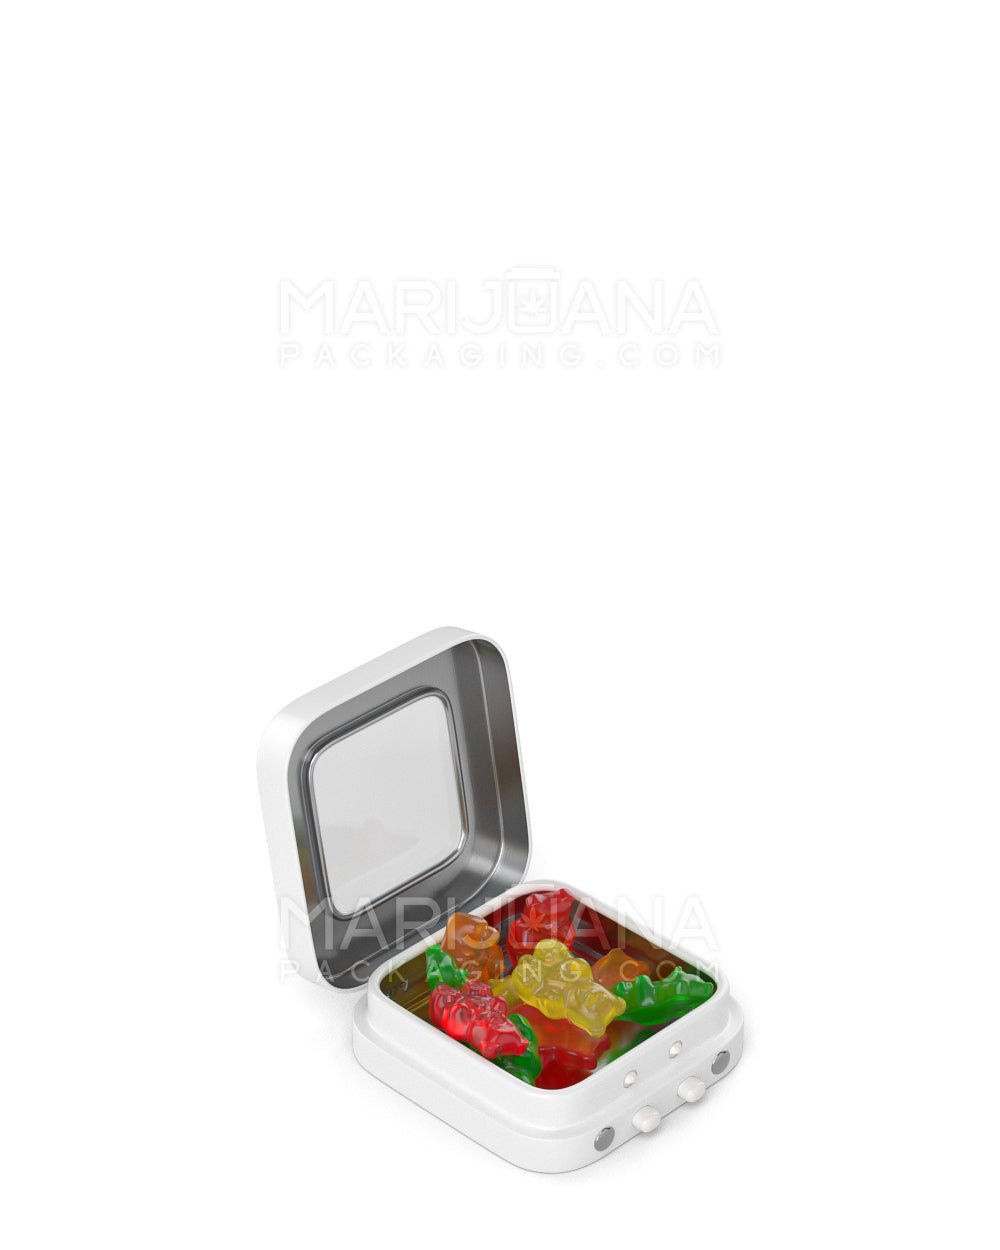 Child Resistant & Sustainable | Hinged-Lid Micro Size Vista Edible & Joint Box w/ See-Through Window |  White Tin  - 2